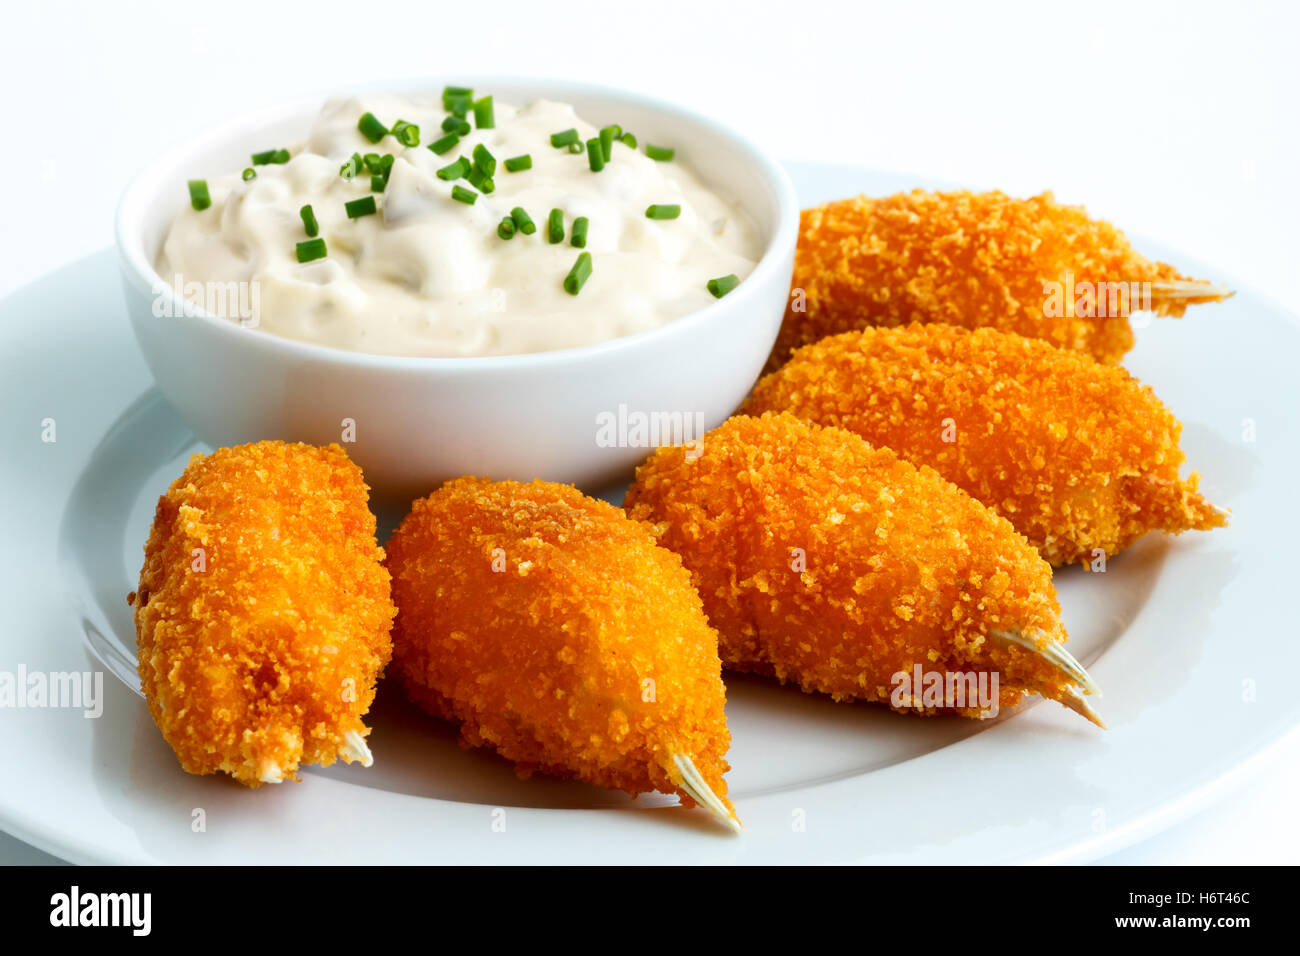 Plate of fried breaded surimi crab claws with bowl of tartar sauce isolated on white. Stock Photo